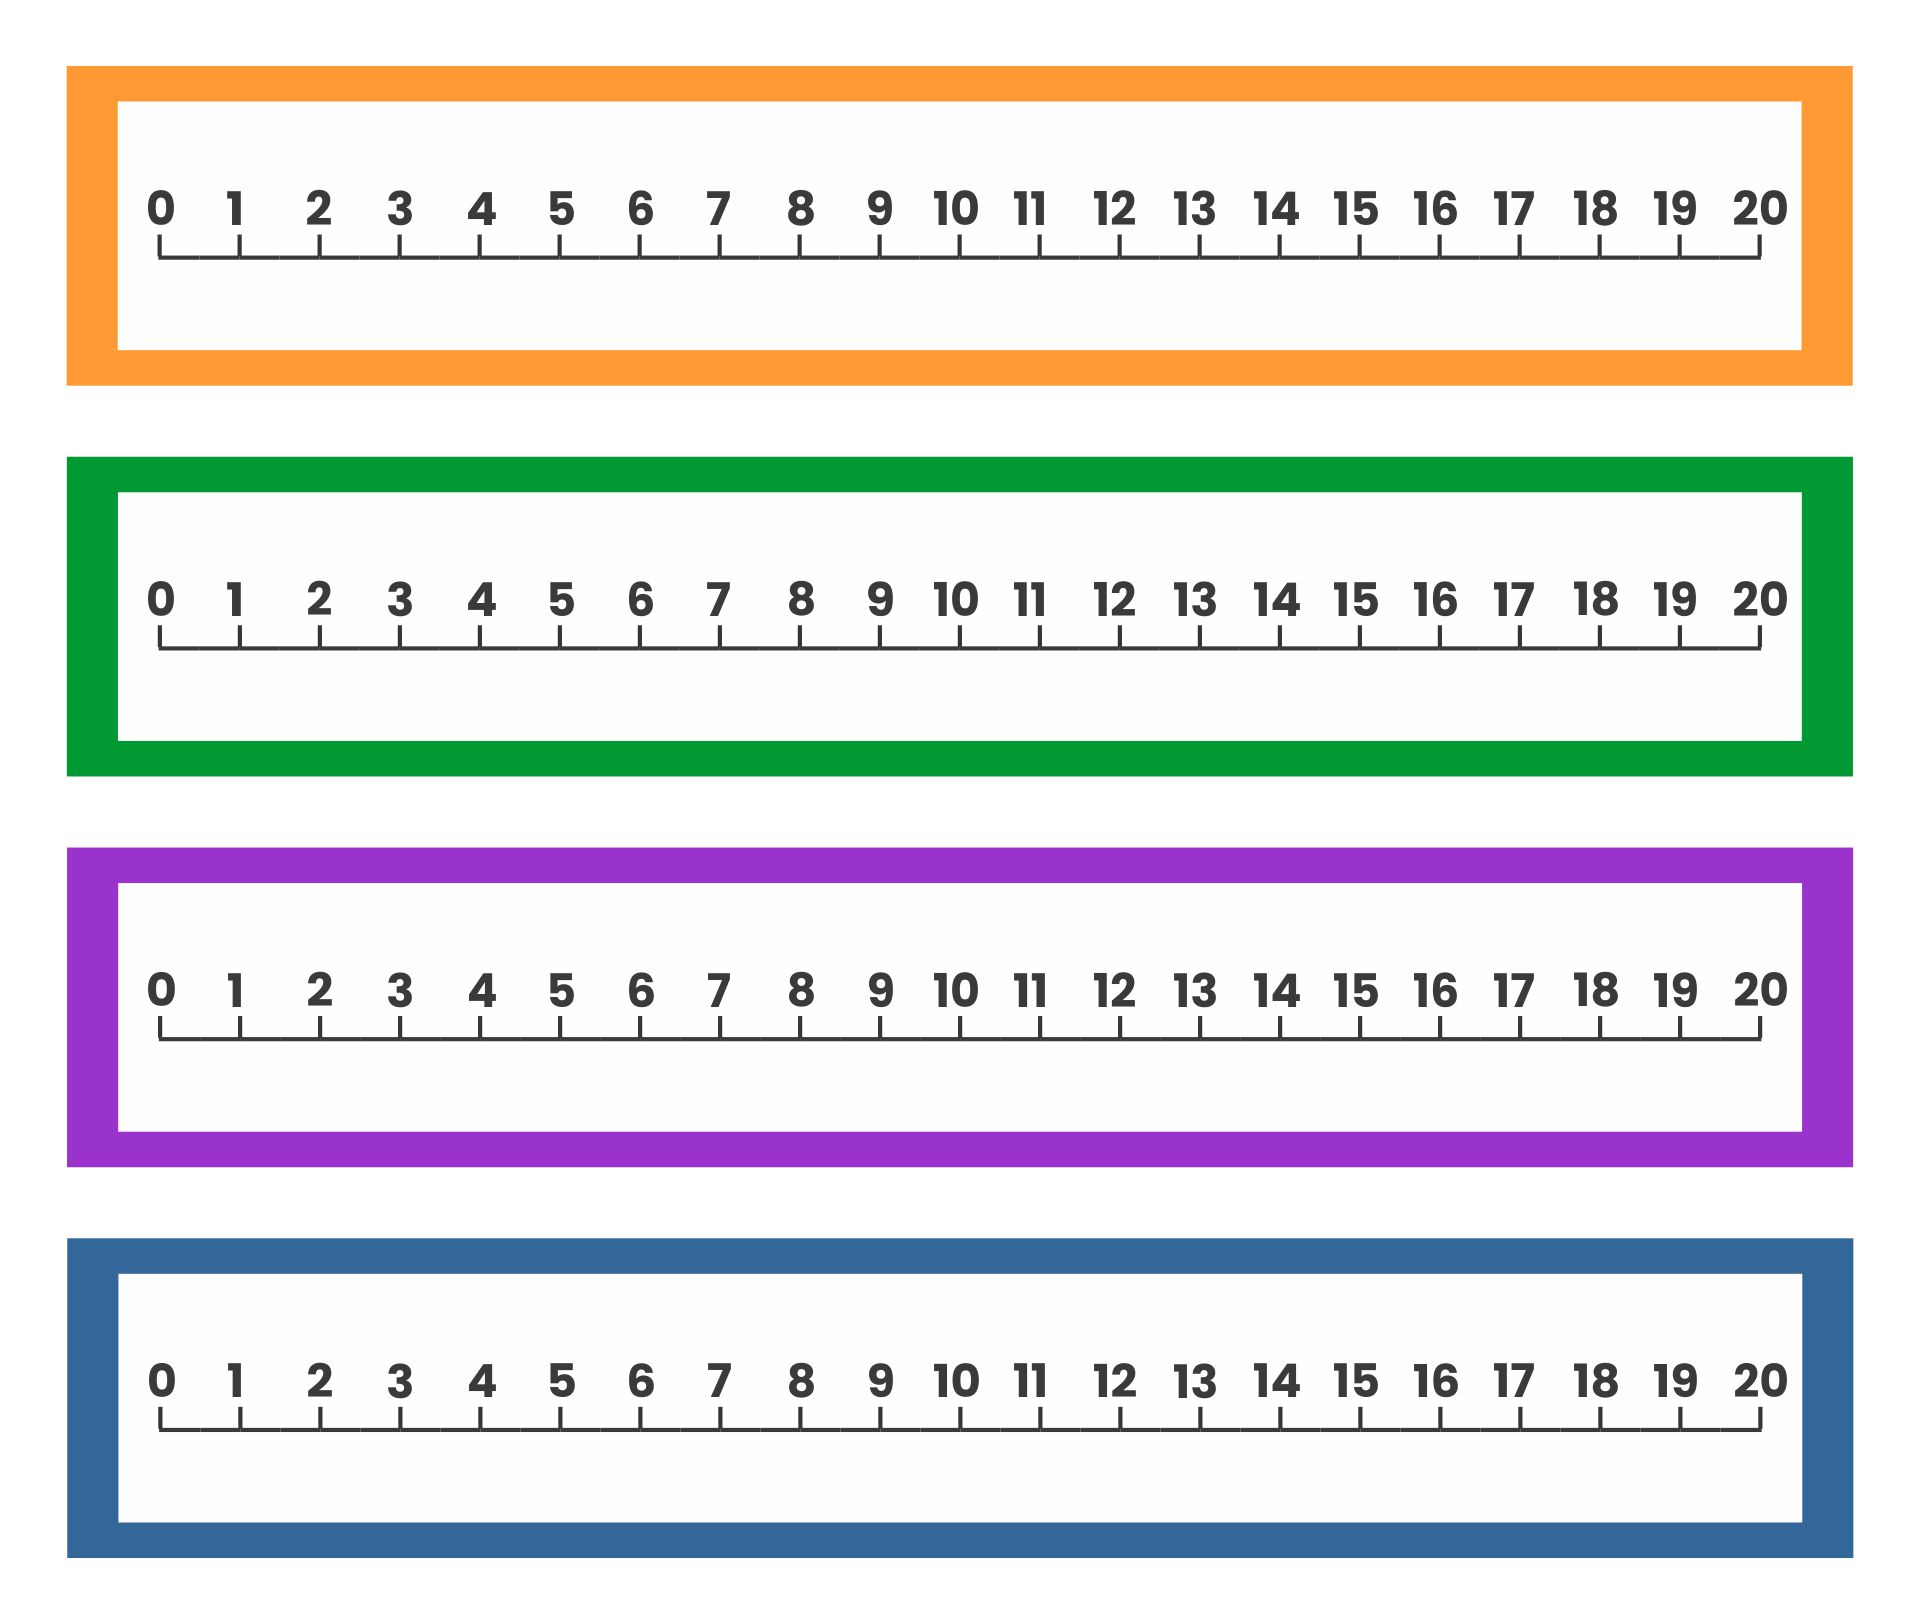 Printable Number Line To 20